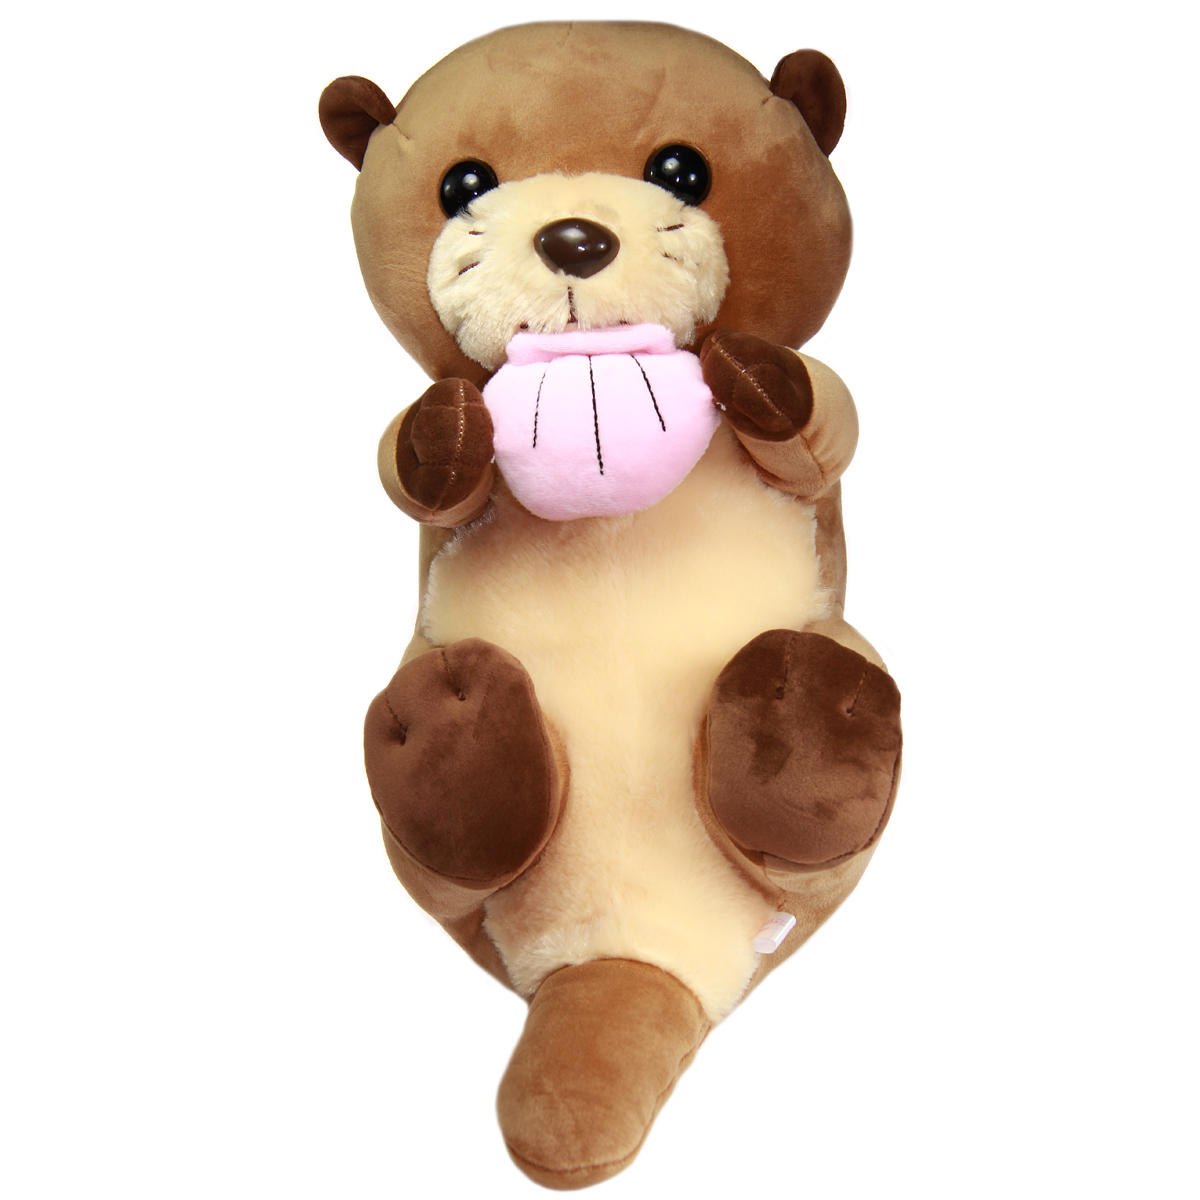 Mochi Puni Kawauso Collection Soft Otter Plush Toy With Sea Shell Brown 17 Inches BIG